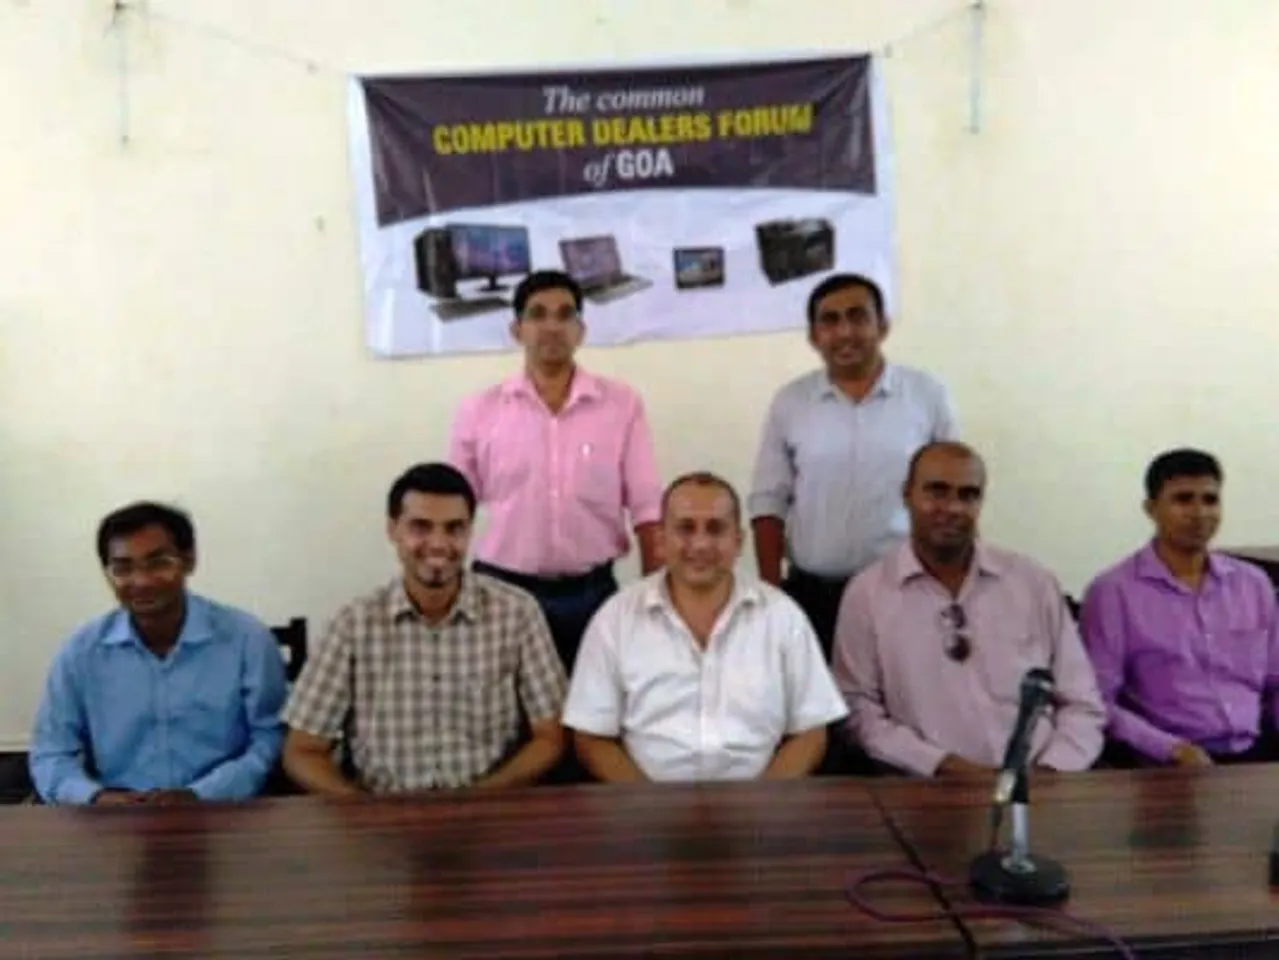 Computer Dealers Forum of Goa elects office bearers